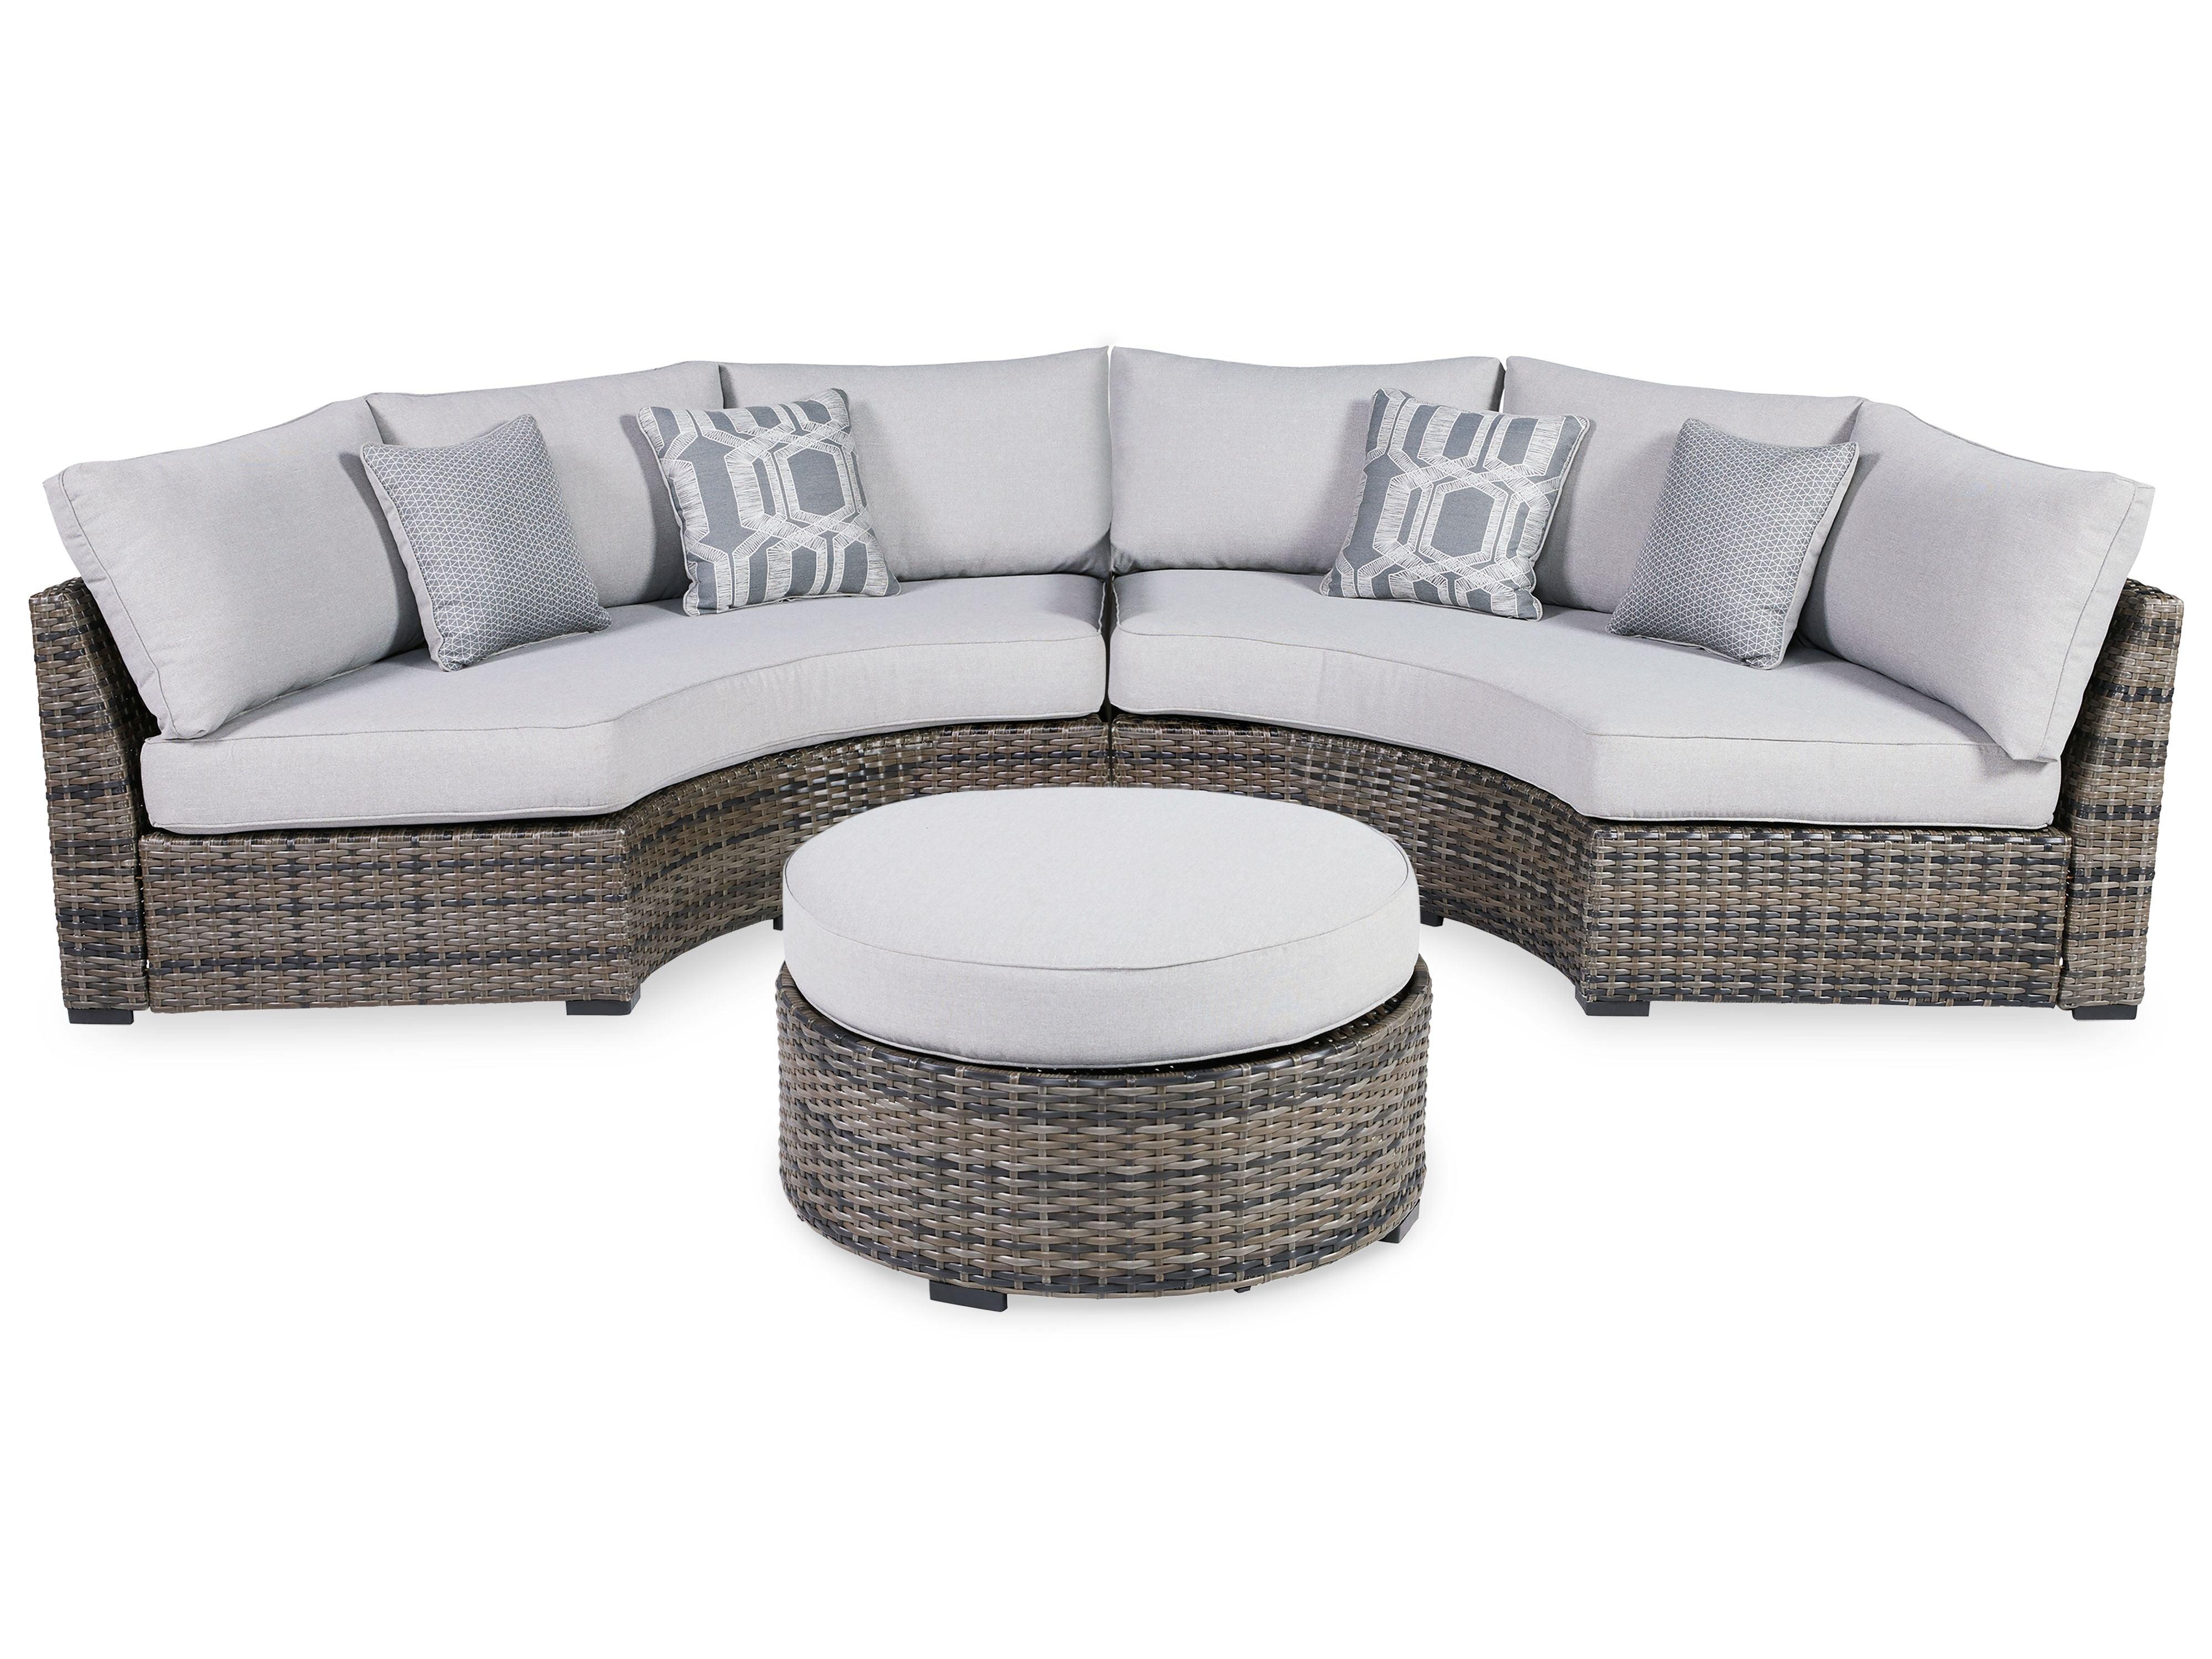 Signature Design by Ashley® - Harbor Court - Dark Gray - 3 Pc. - Sectional Lounge Set - 5th Avenue Furniture